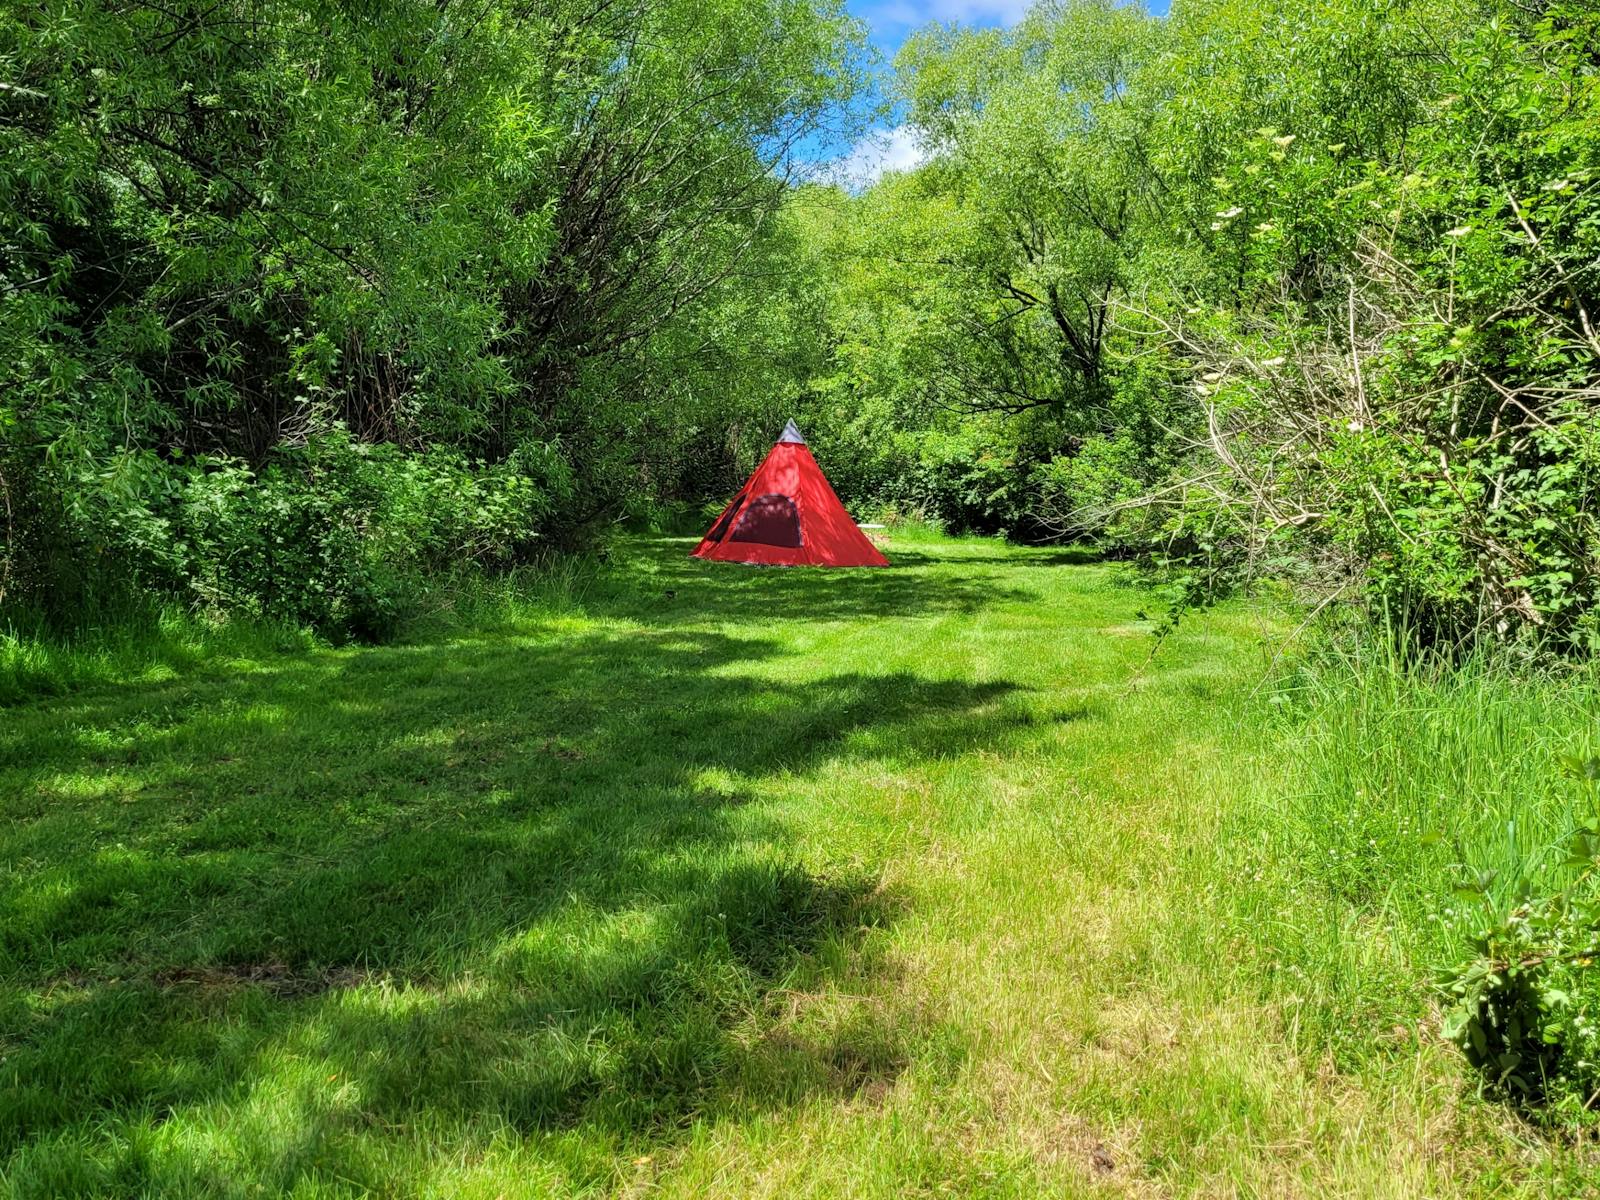 Small Campsite area with Teepee Shaped Tent set up